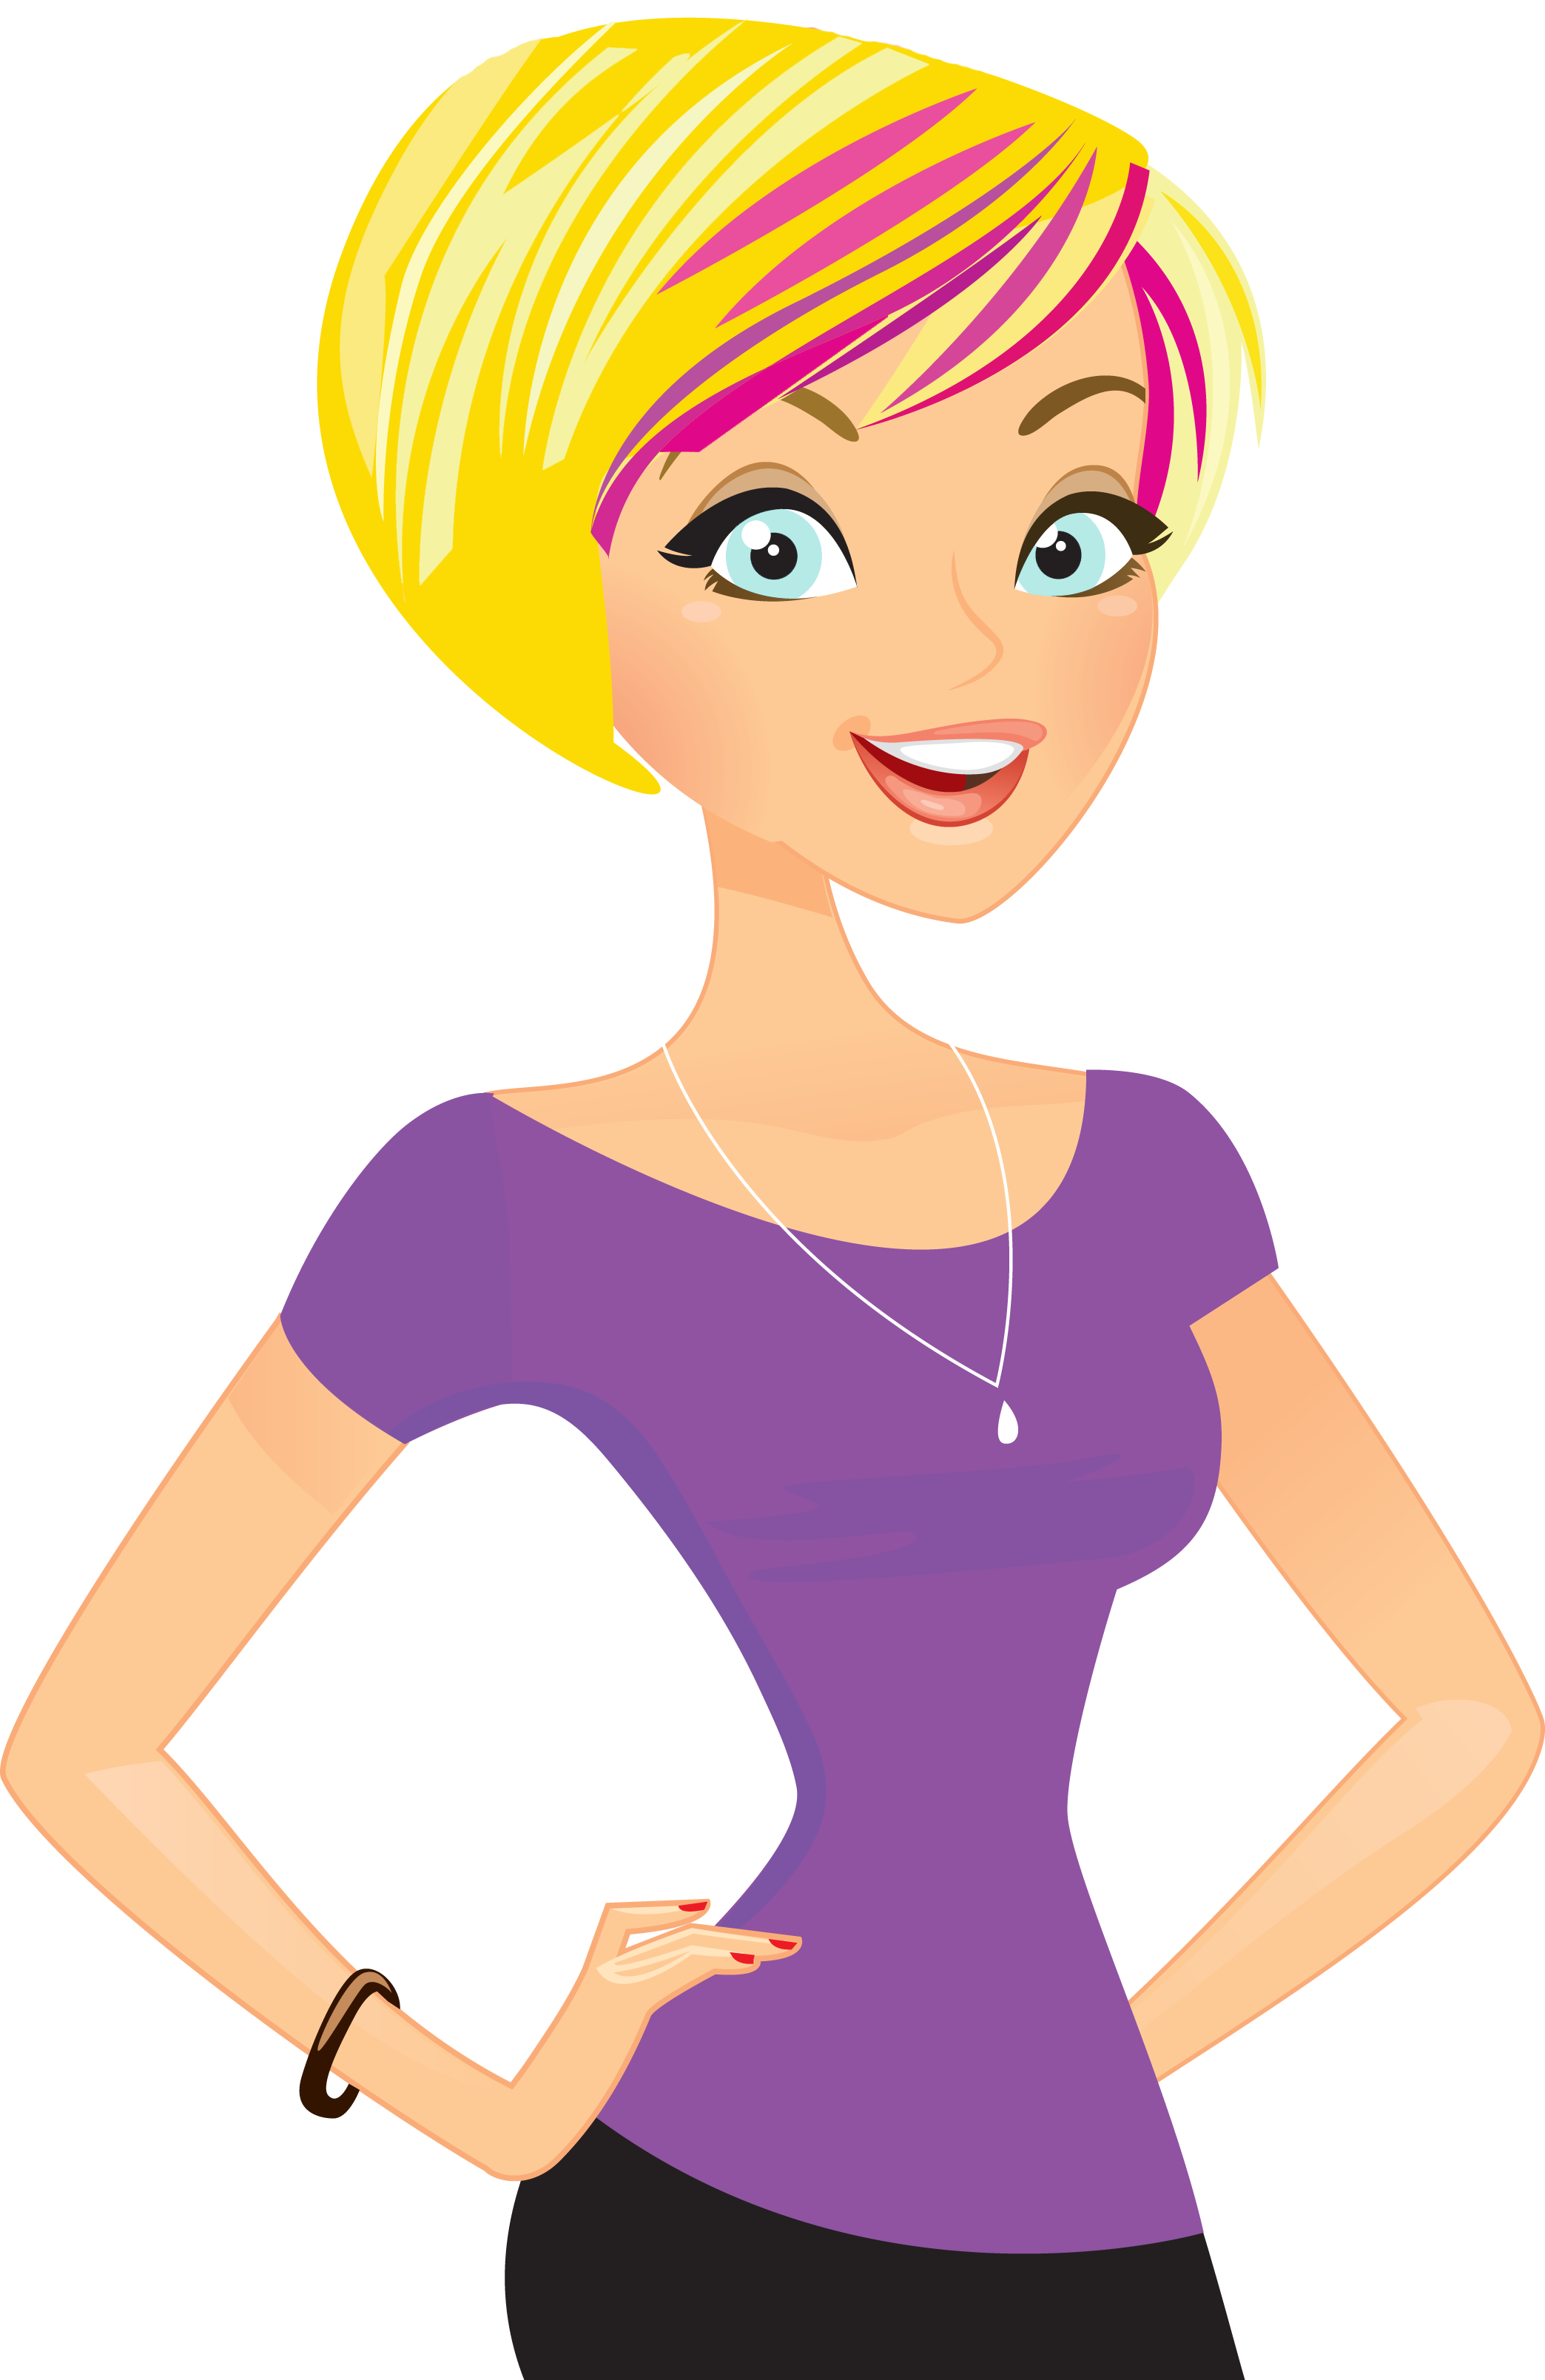 Mom Cartoon Images - ClipArt Best